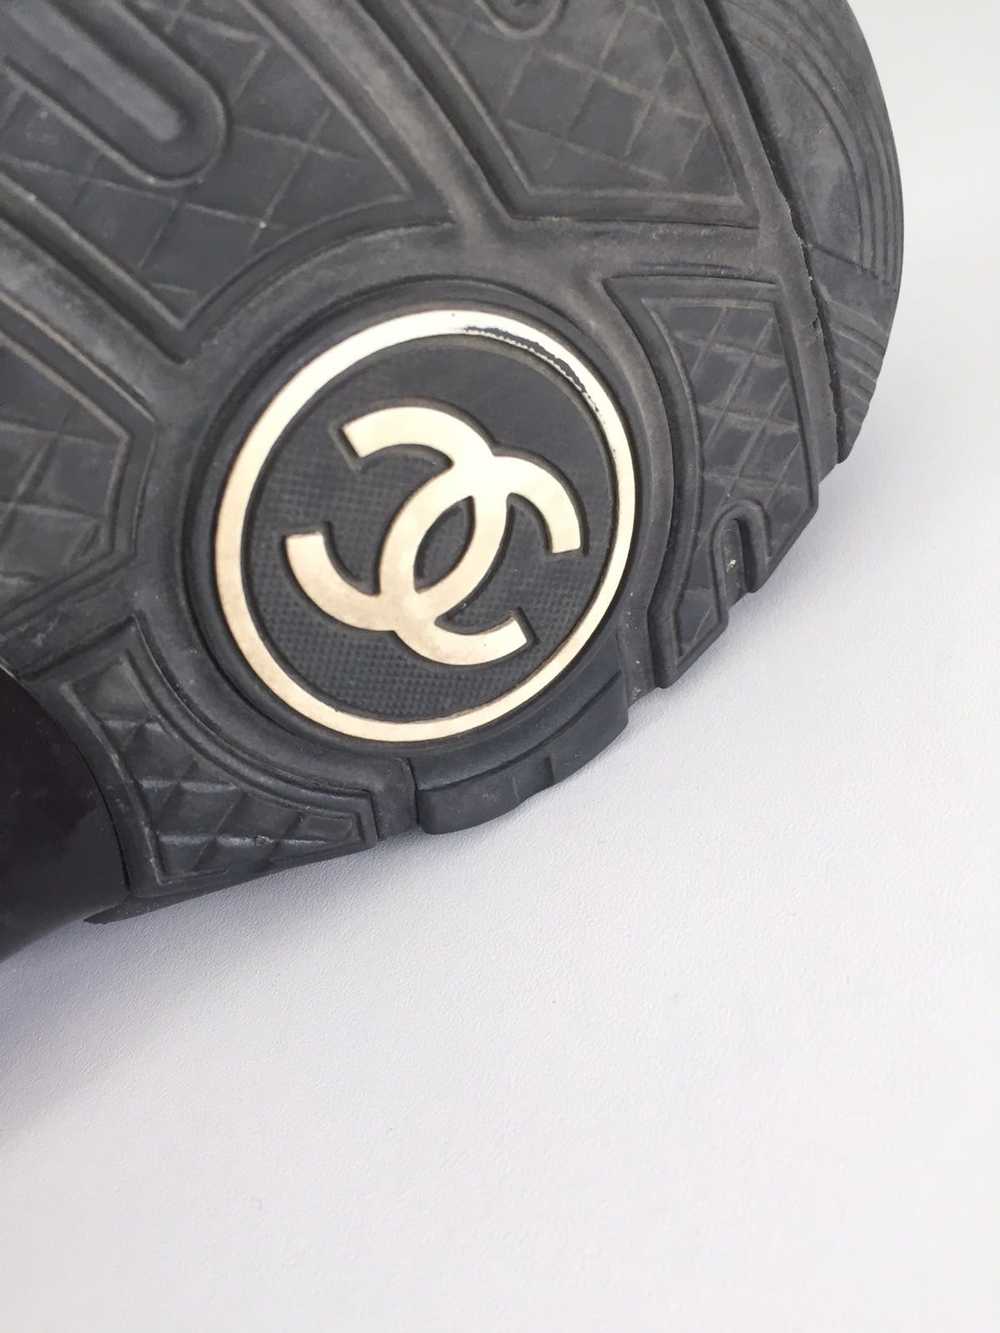 Chanel Chanel Sneakers - image 5